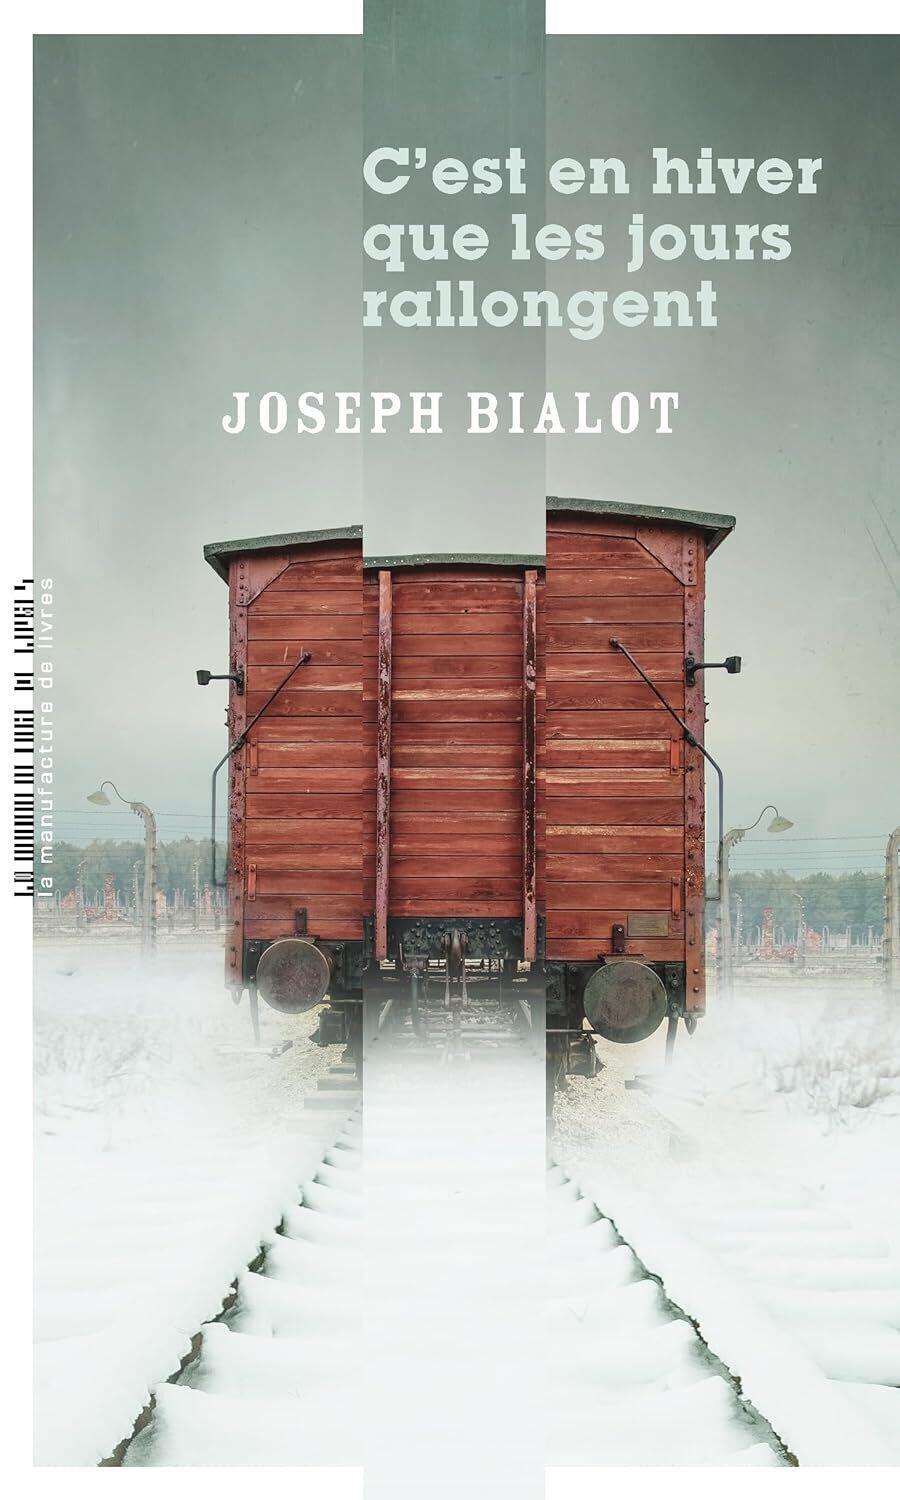 It's in winter that the days get longer by Joseph Bialot reissued on the occasion of the writer's centenary